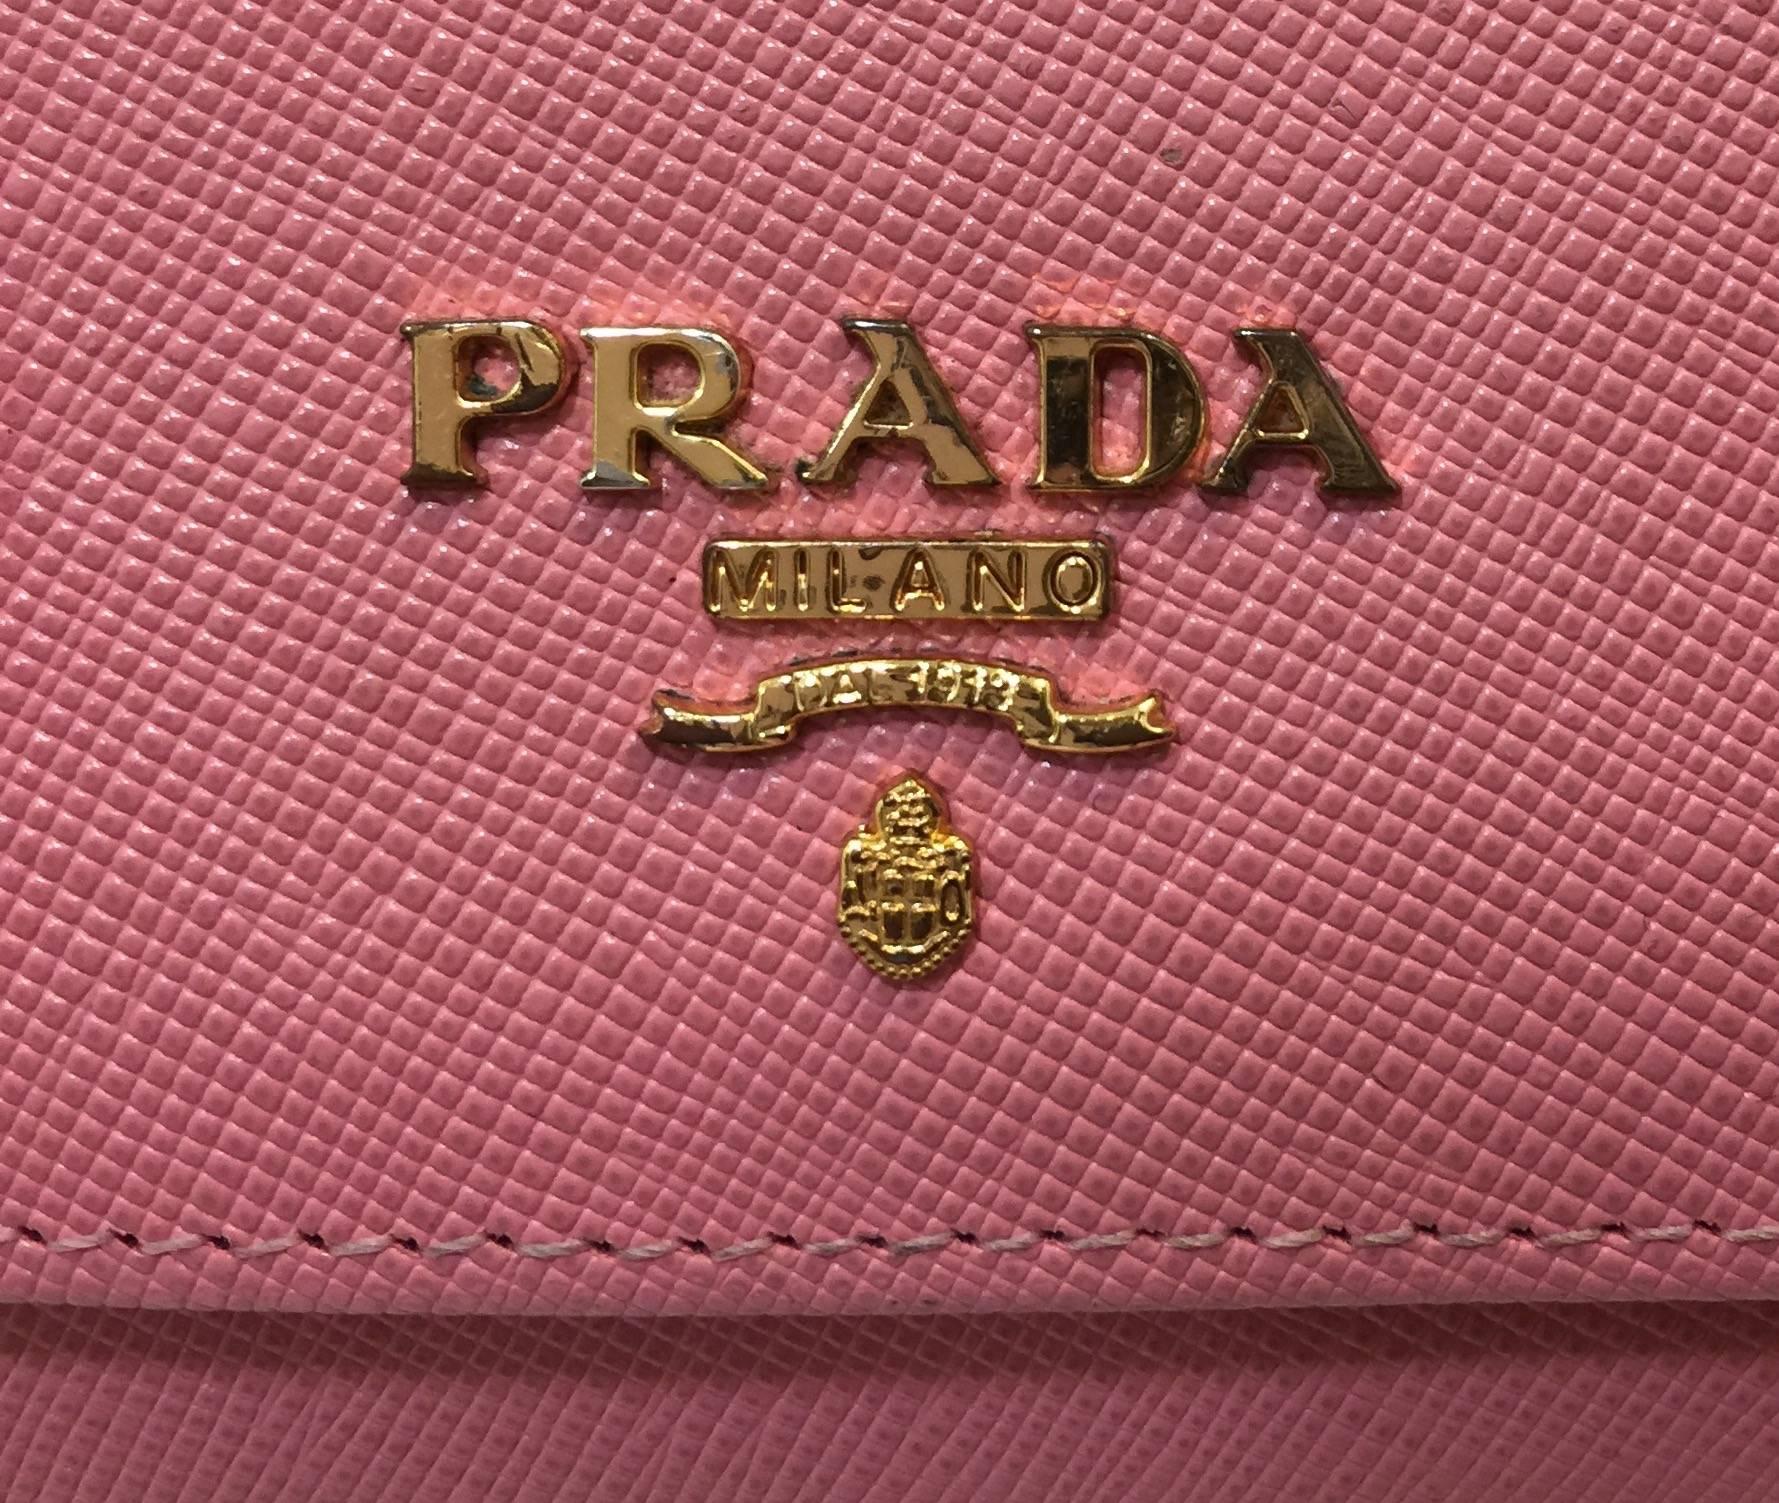 Prada Pink Saffiano Leather Wallet on a Chain  1